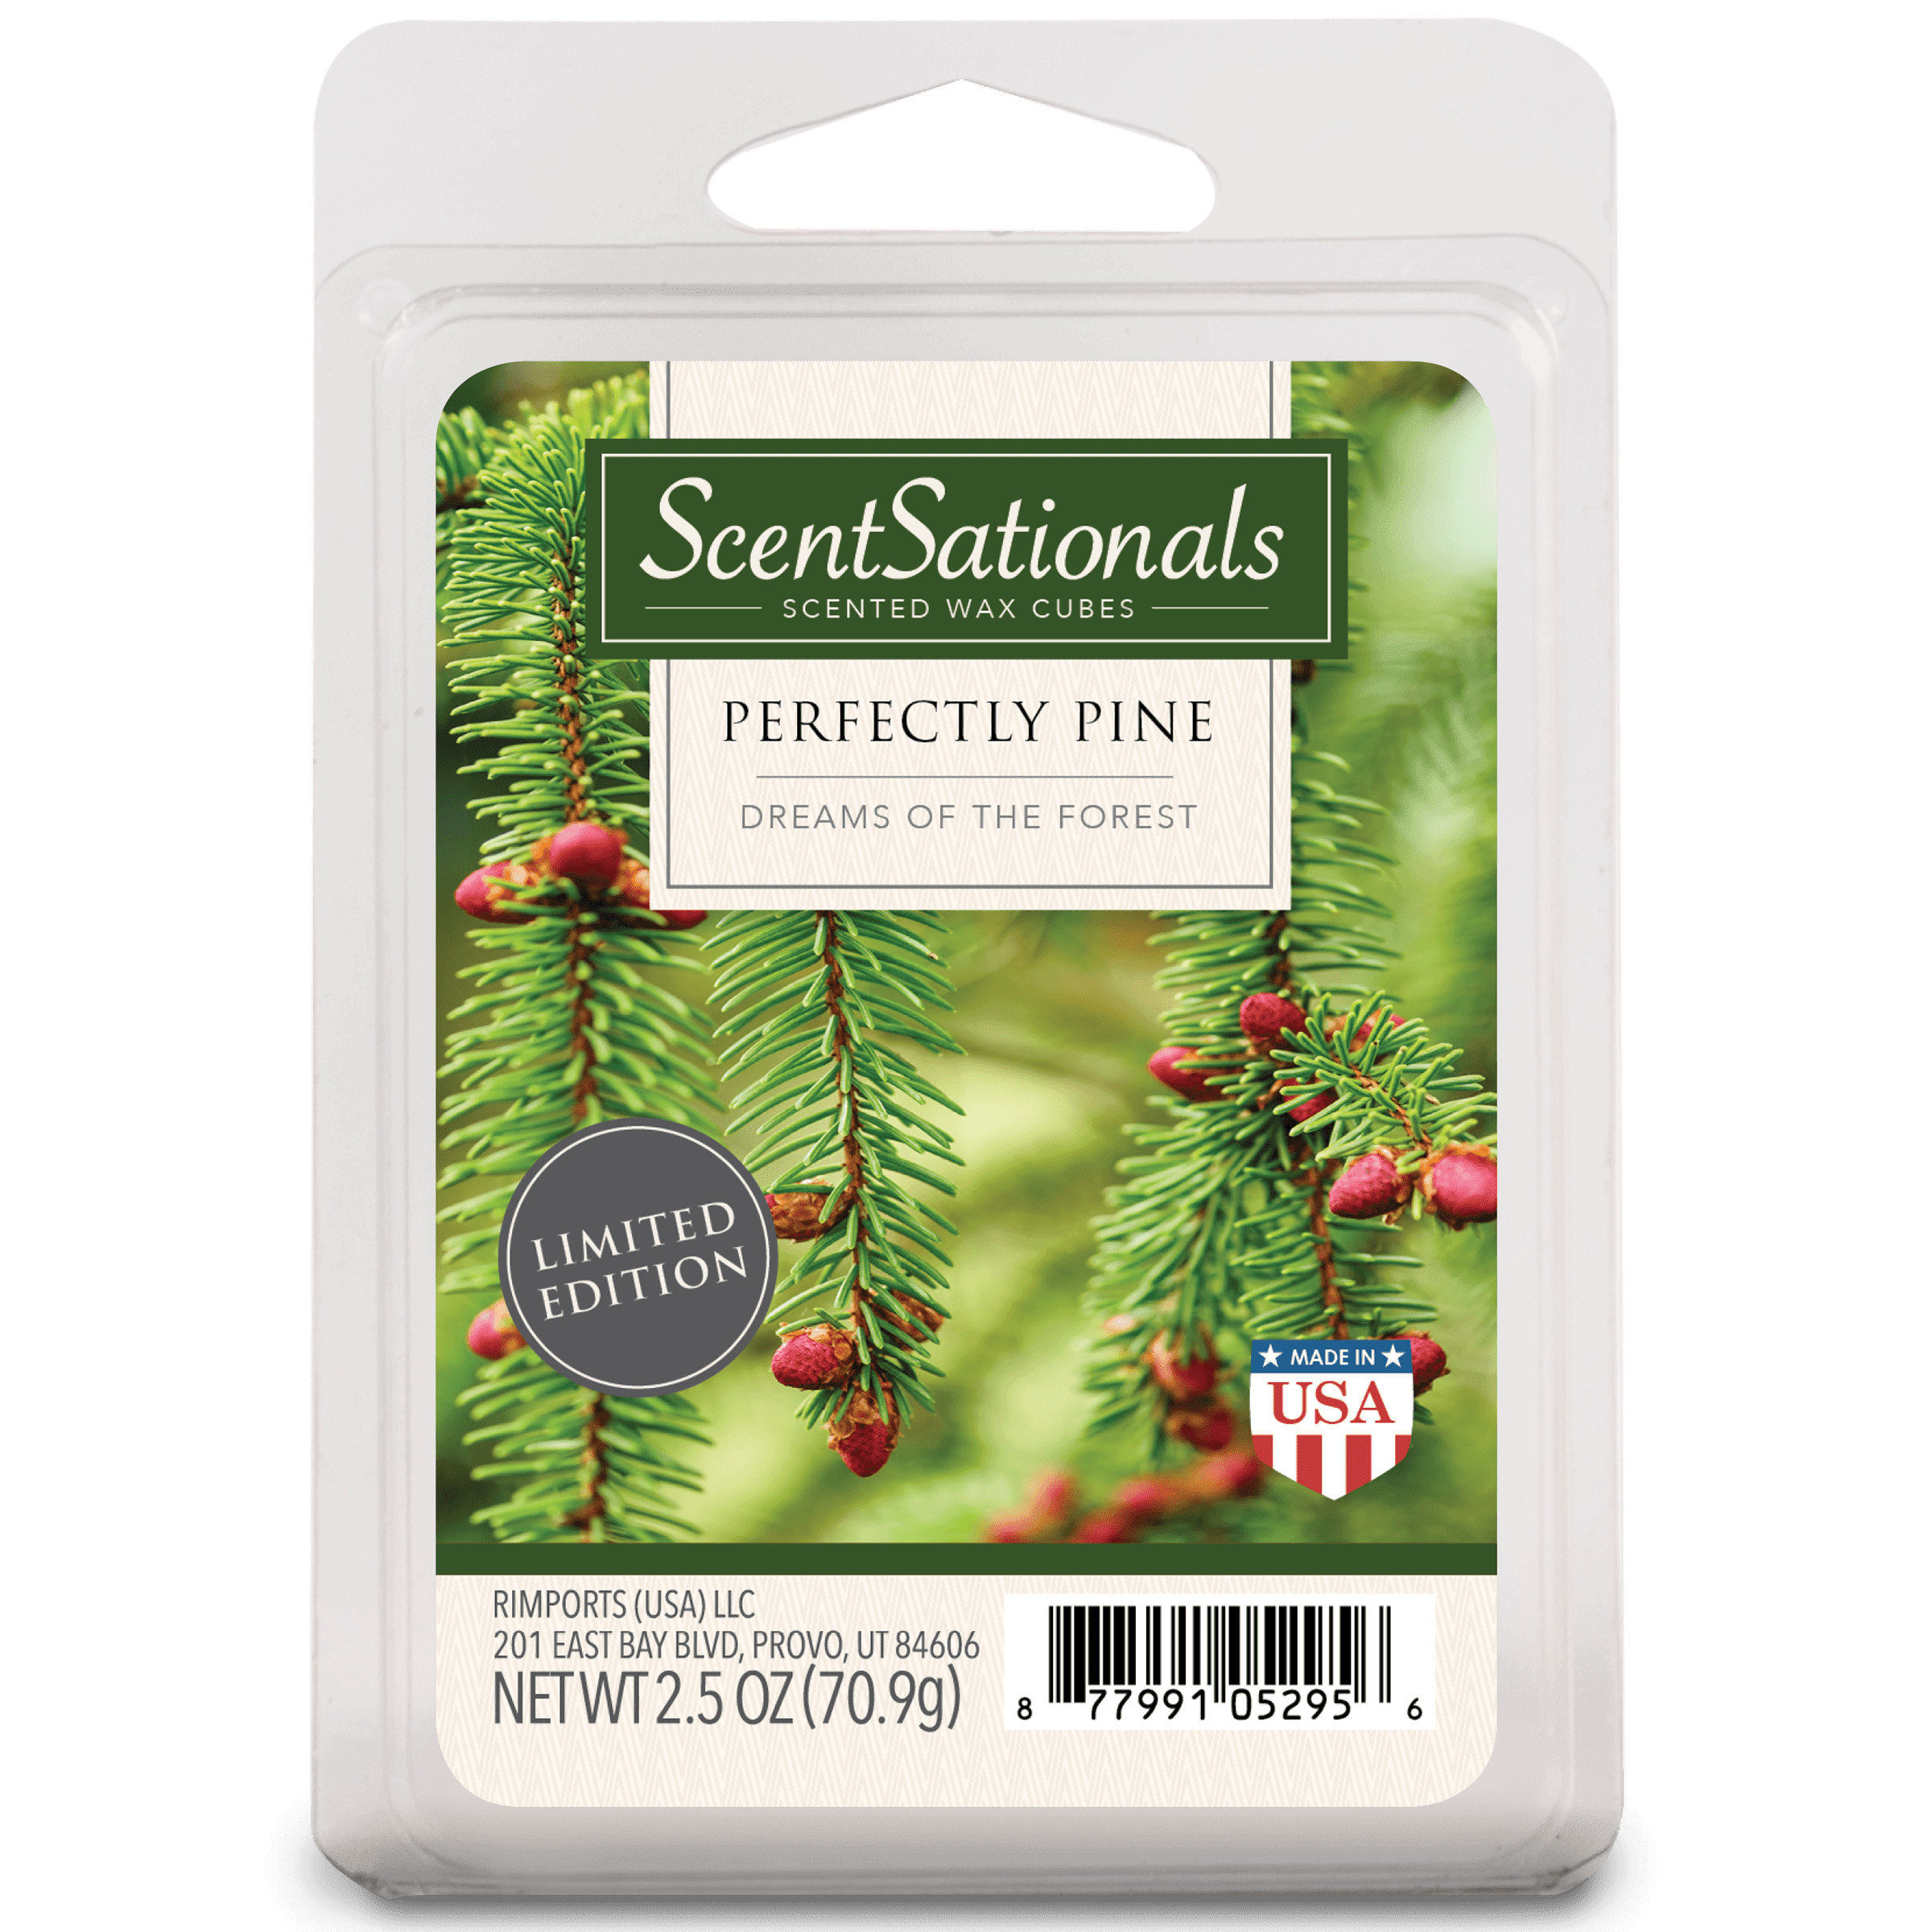 ScentSationals 2.5 oz Perfectly Pine Scented Wax Melts